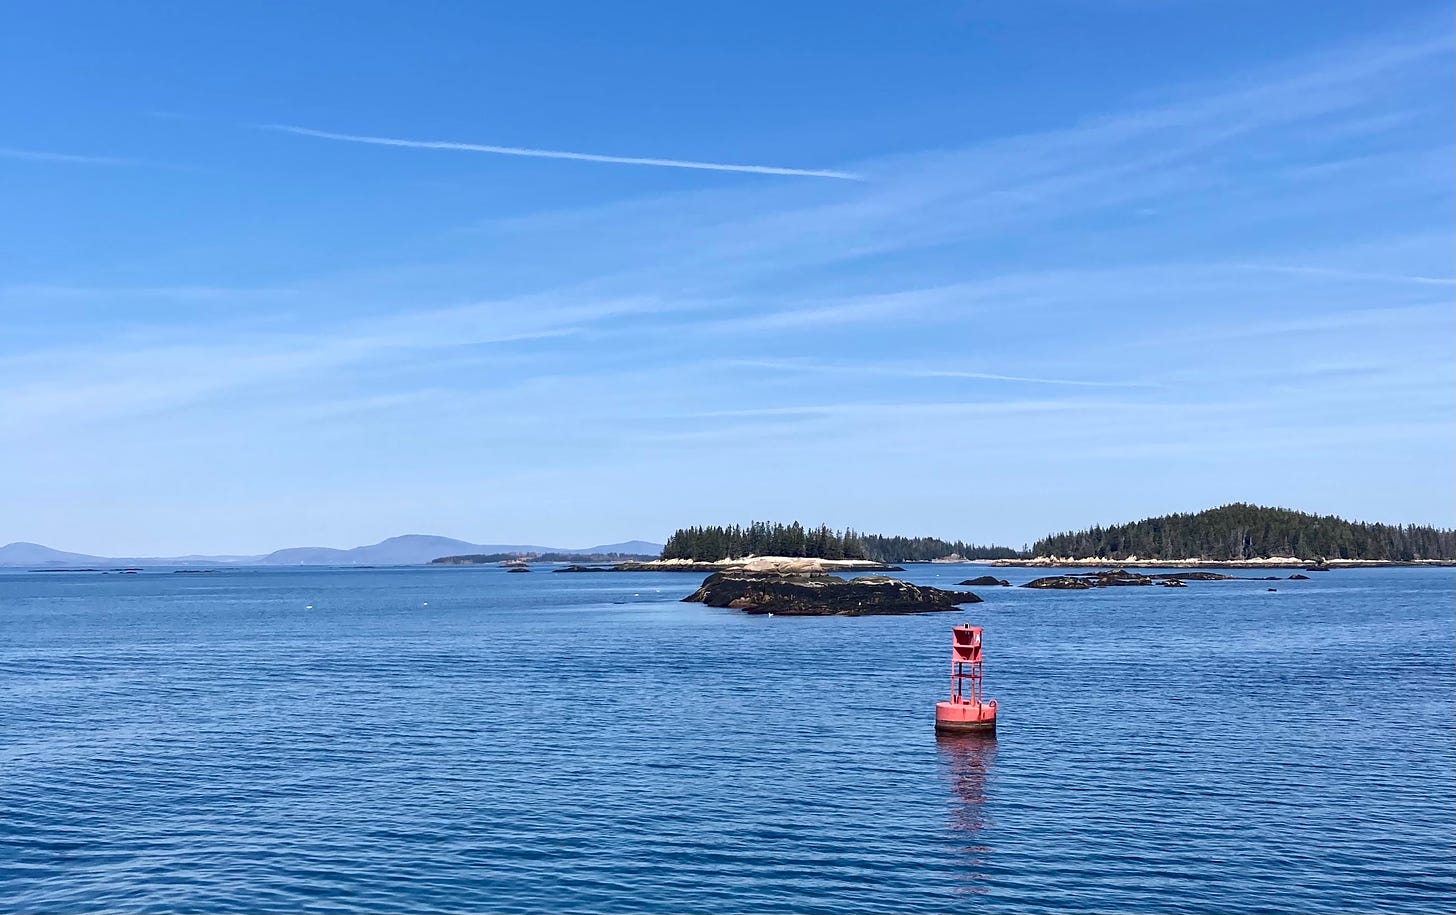 A red buoy sits on the water. There are small pine-covered islands behind it, and far in the distance, blue hills.